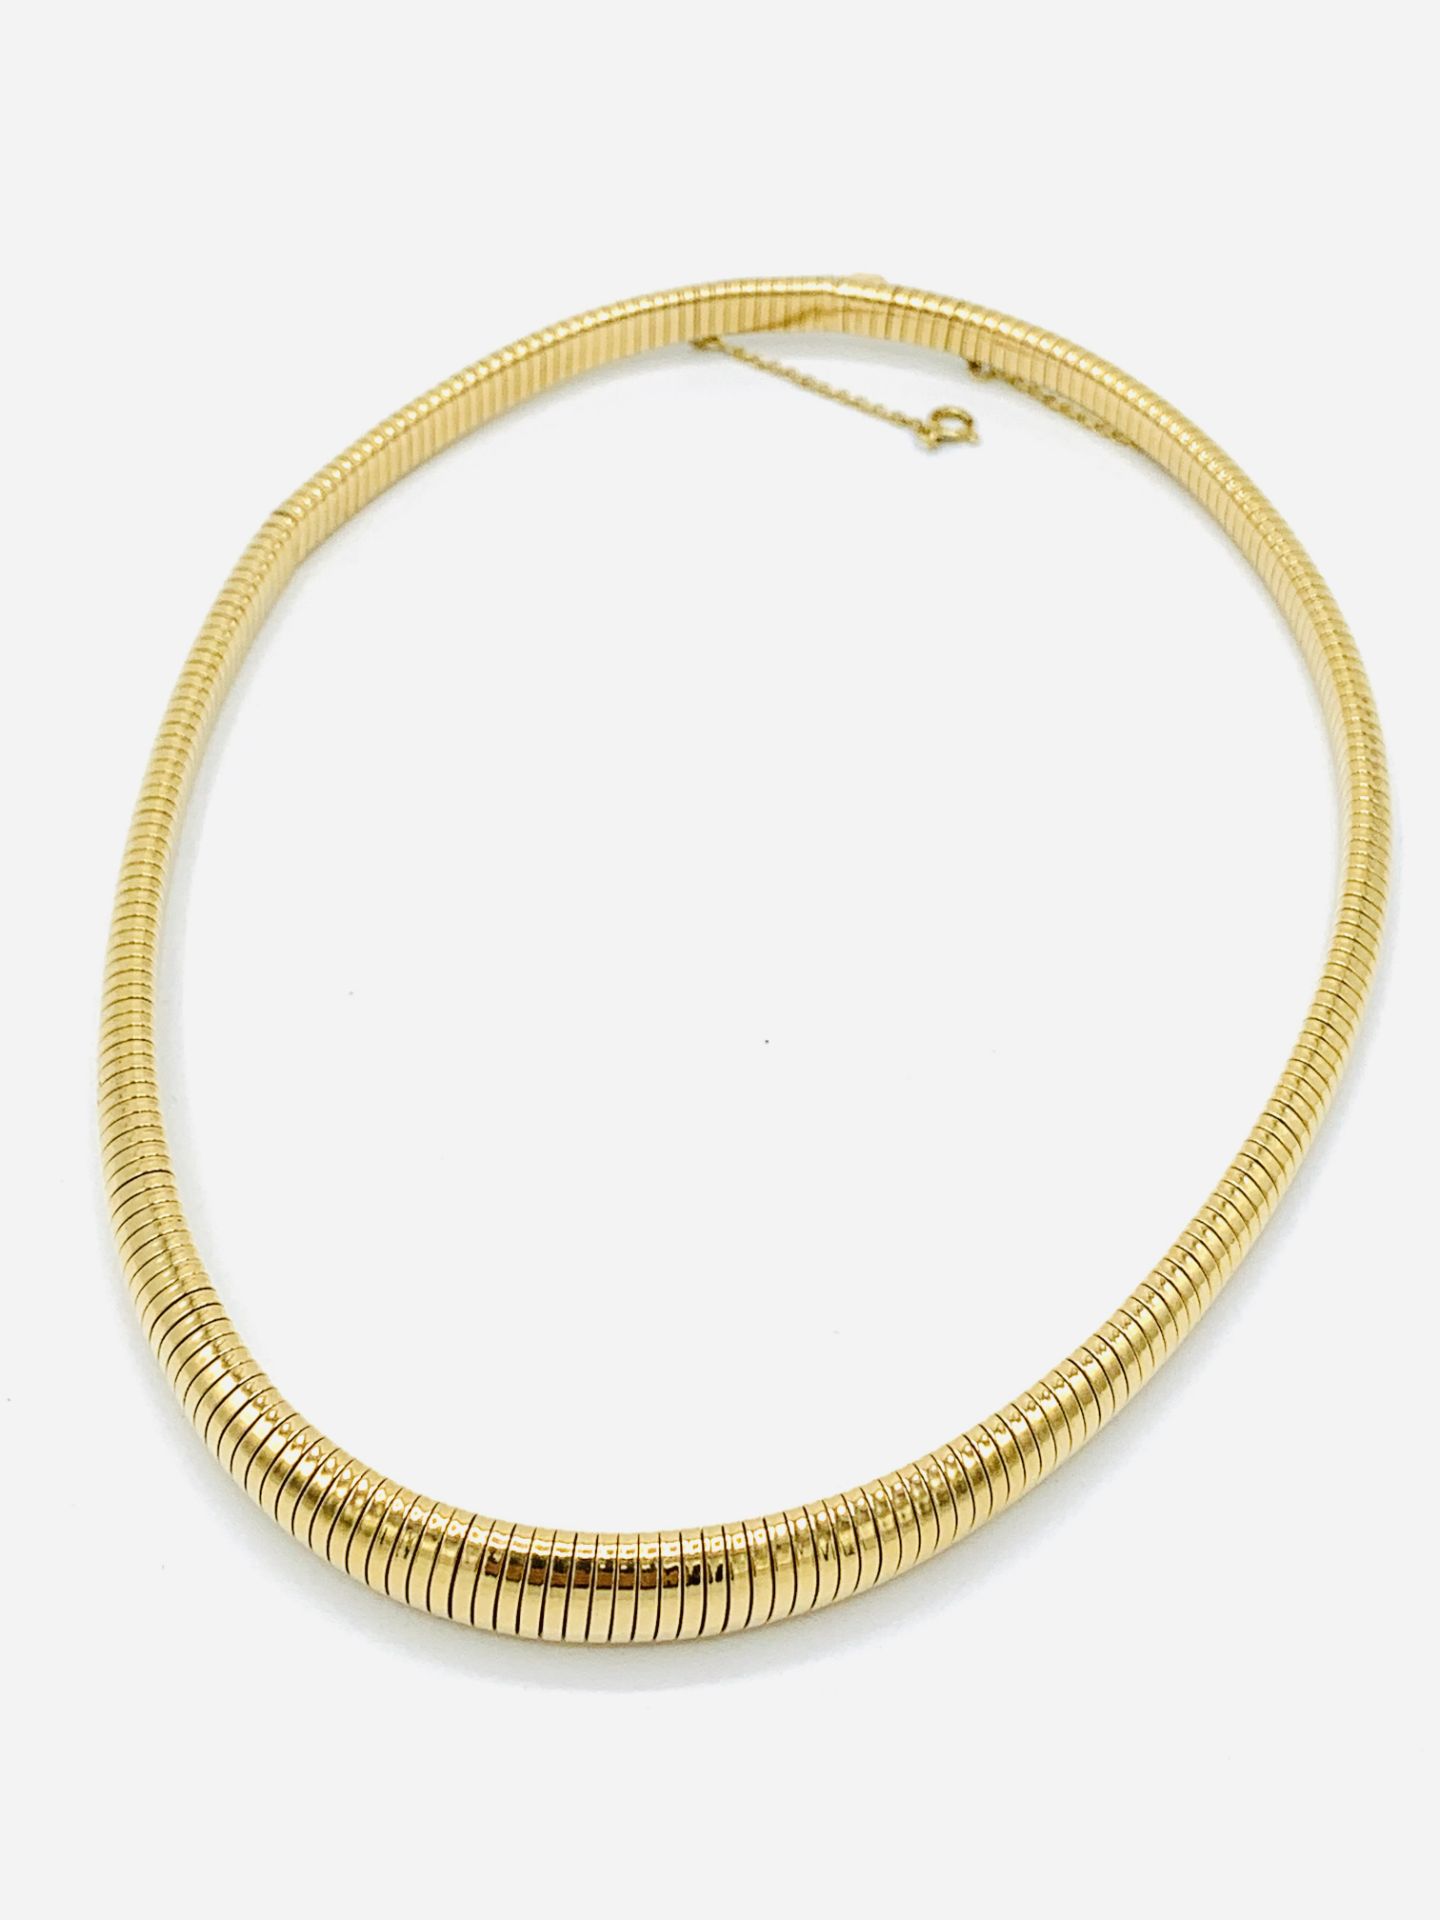 18ct gold turbogaz collar necklace. - Image 4 of 4